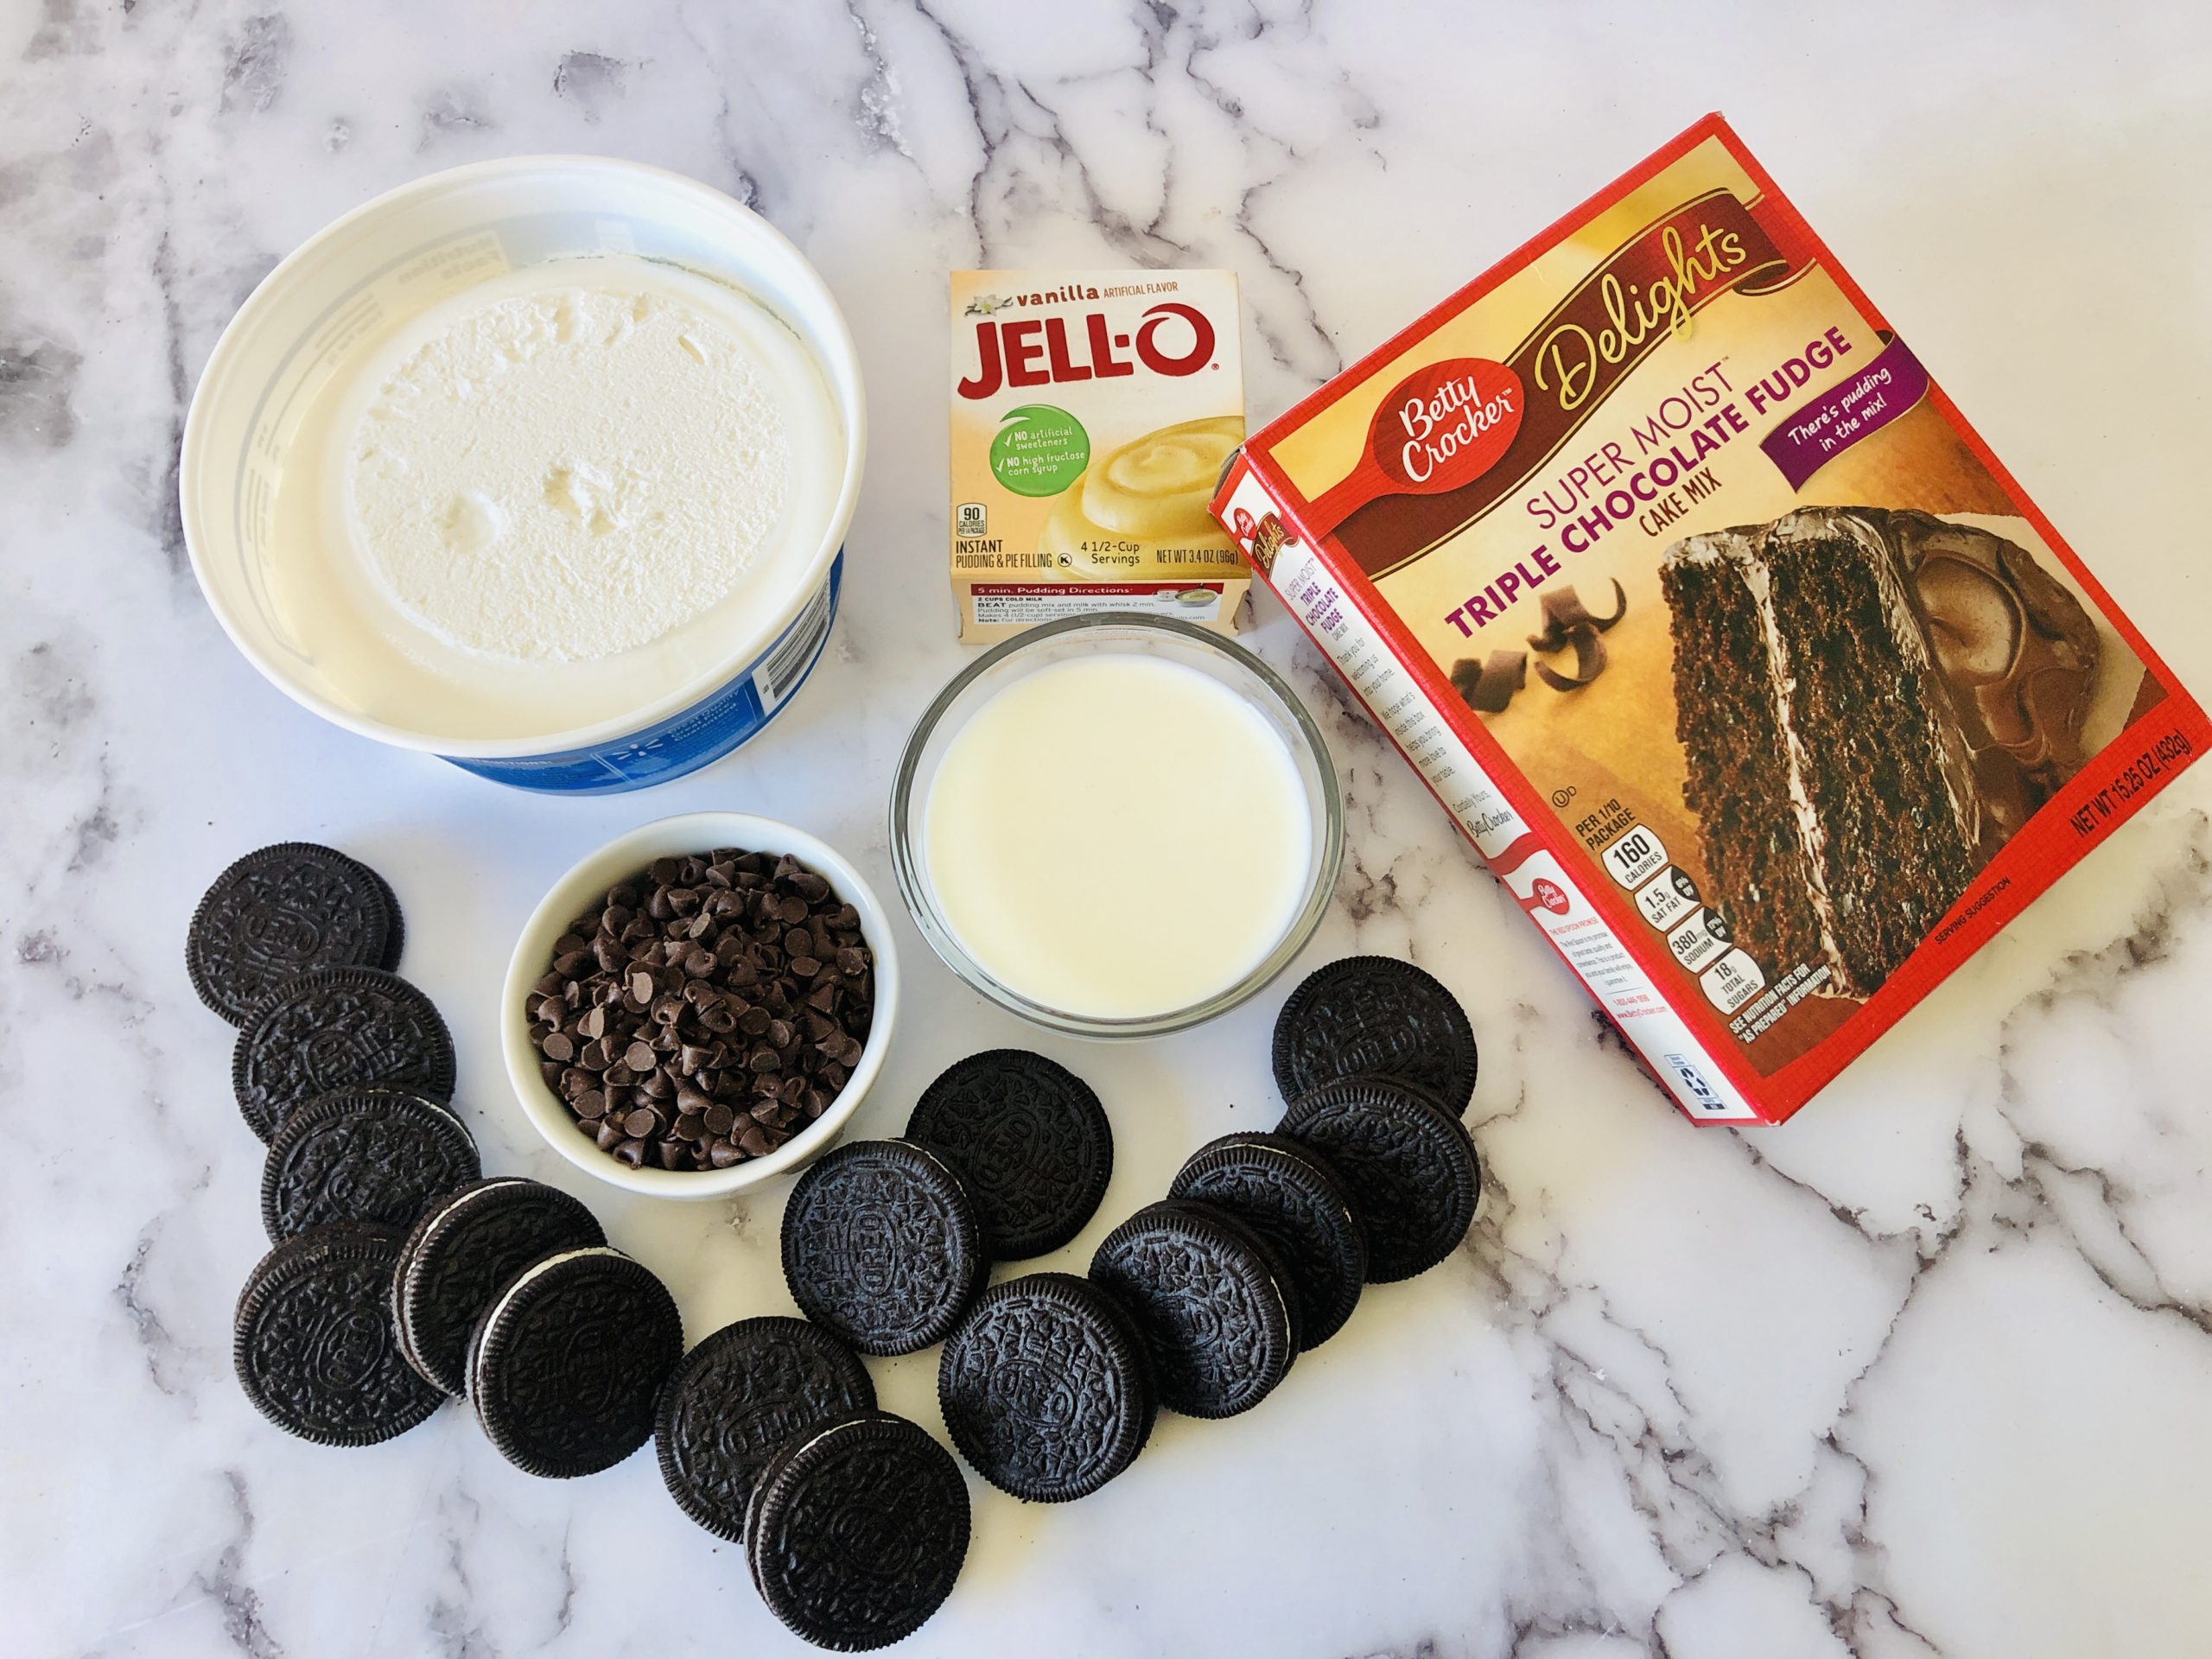 Box cake mix, oreos, pudding and ingredients for cake.